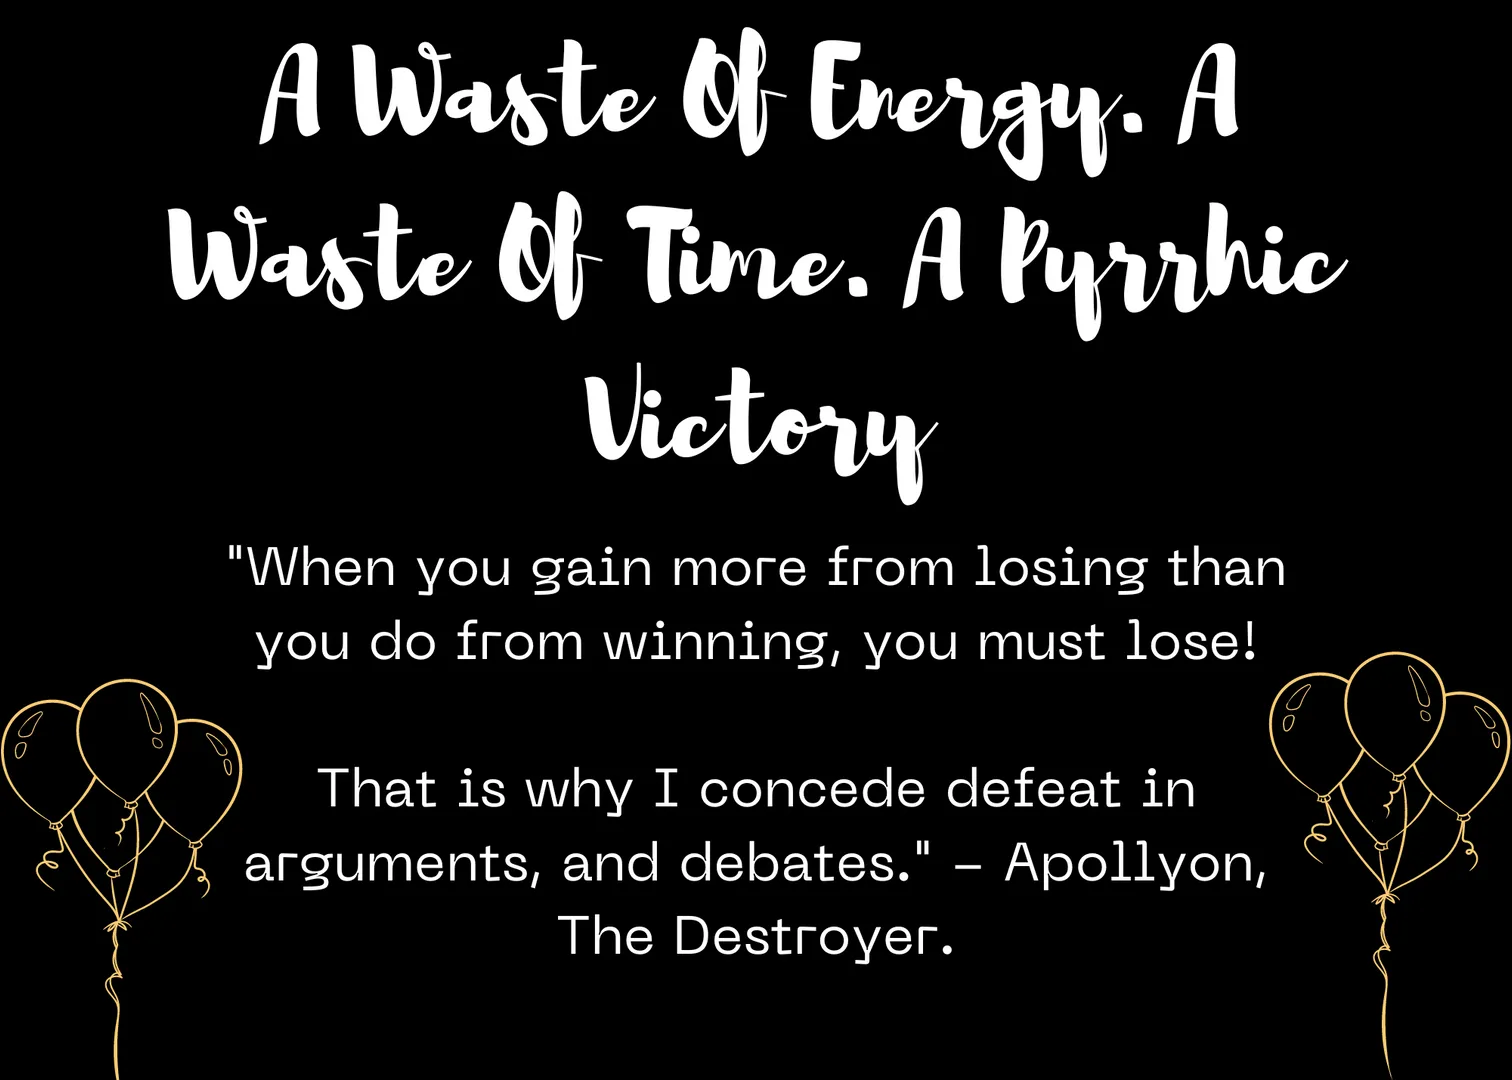 Godwrath Lore Quote: A Waste Of Energy. A Waste Of Time. A Pyrrhic Victory
The quote can be found in the post's image.

Note: If you don't want to hear what someone has to say, why do you think they would want to hear what you have to say? As for debates, they are often times just passive-aggressive arguing.

Debate if you're getting paid to debate. If you start a debate, and the money you're getting paid just isn't worth being yelled at or abused on stage? Quit immediately. Your self-worth is worth more than any amount of money or peer approval.

Get today's quote on OpenSea for free! Make It yours!

https://opensea.io/assets/ethereum/0x495f947276749ce646f68ac8c248420045cb7b5e/54110518708055511570961916387100735752108288770146632882064646614433975506800

#quotes #crypto #NFTart #nft #Gamedev #Nftartist #truth #motivation #inspiration 